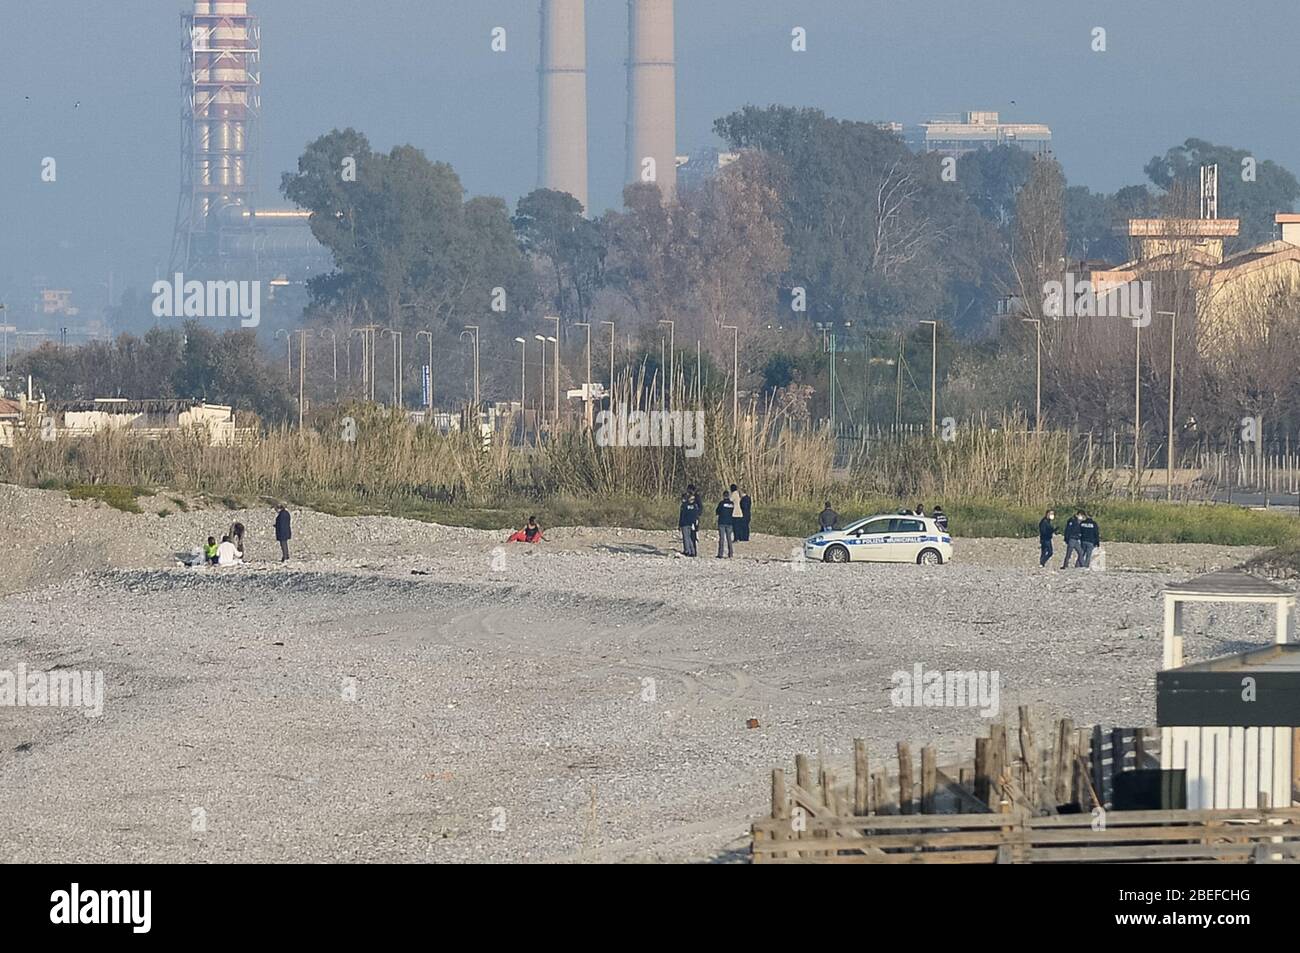 Corigliano-Rossano, Italy. 13th Apr, 2020. Corigliano-Rossano, a 20-year-old Senegalese dies drowned in the sea a few meters from the beach in Corigliano-Rossano, despite the carpet checks for the restrictions imposed by the Government for the control of the infection by Coronavirus (COVID-19). 13/04/2020, Corigliano-Rossano, Italy Credit: Independent Photo Agency Srl/Alamy Live News Stock Photo